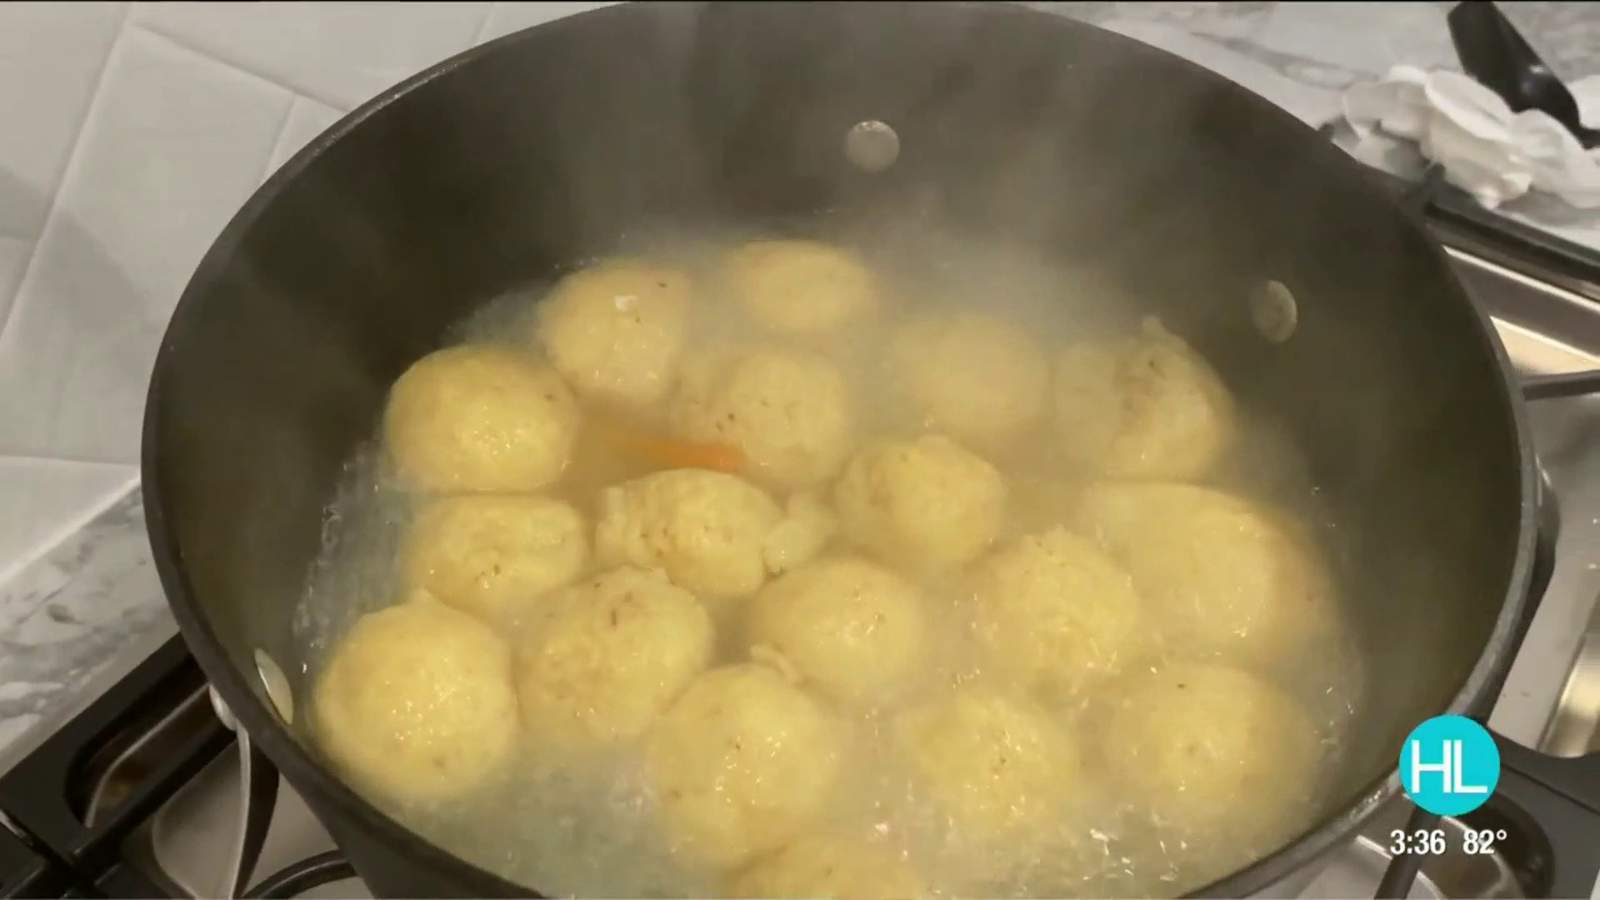 Kicking off the Jewish holiday of Passover with a simple matzo ball soup recipe